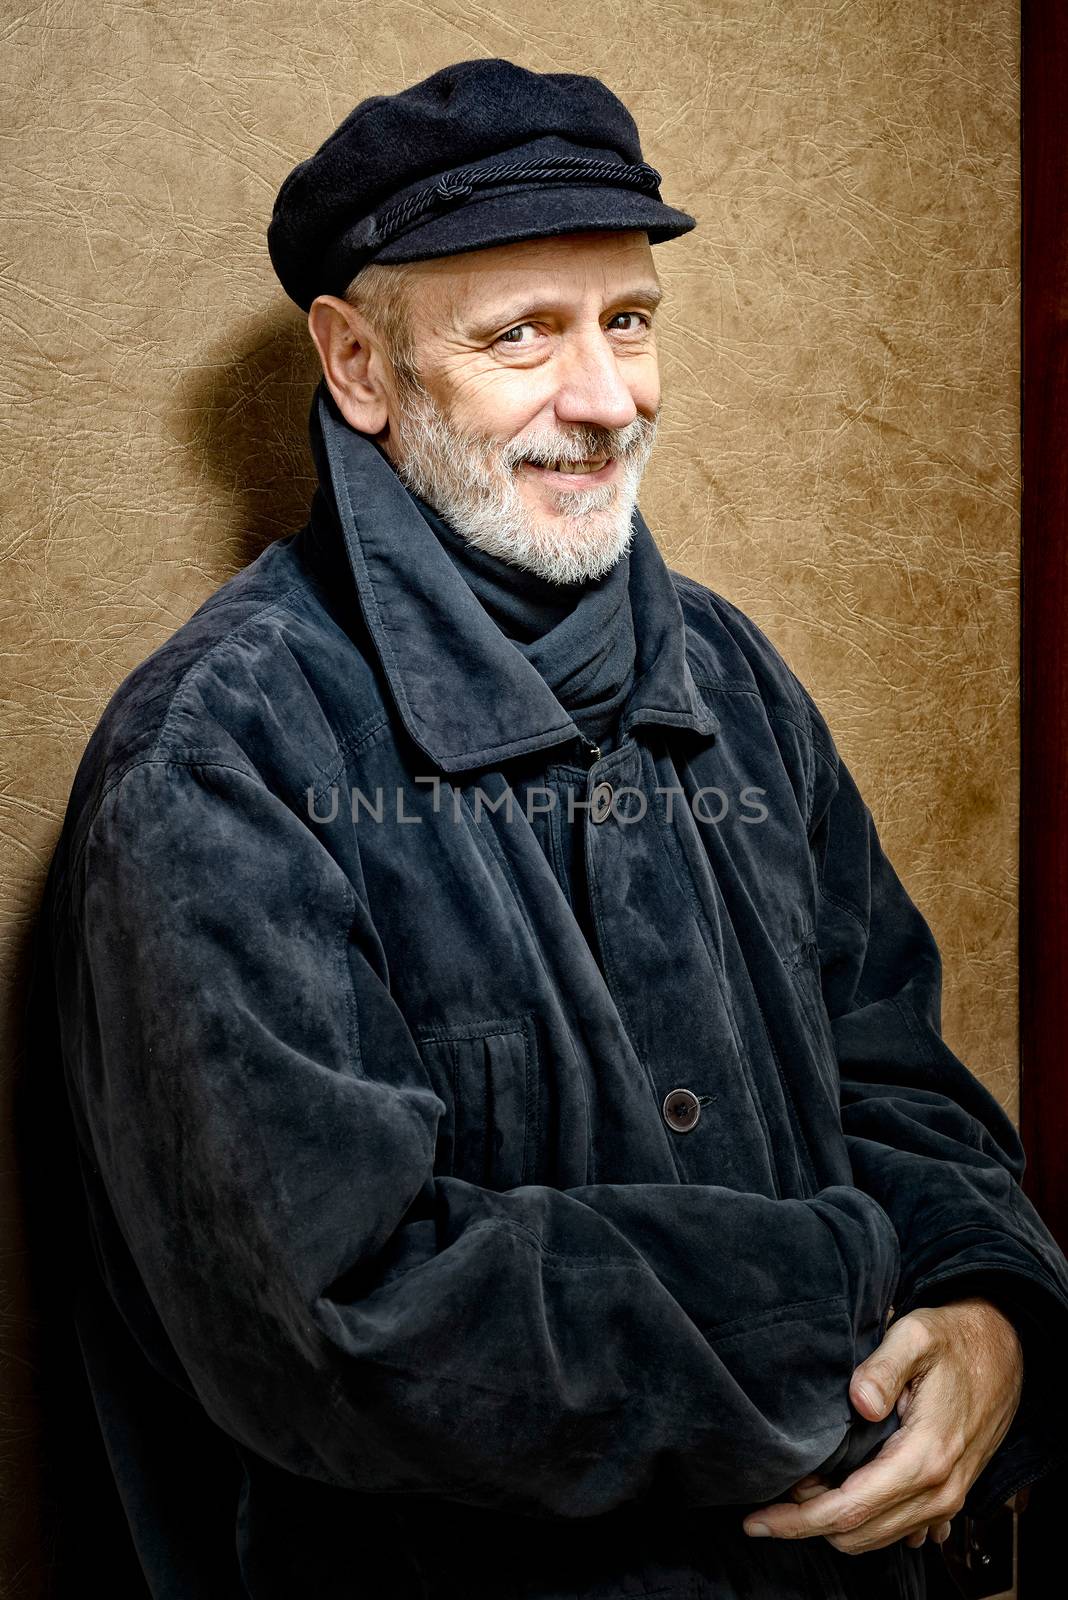 Portrait of a mature smiling man with a white beard and a cap on the head. He could be a sailor, a worker, a docker, or even a gangster or a thug. He has a penetrating gaze.